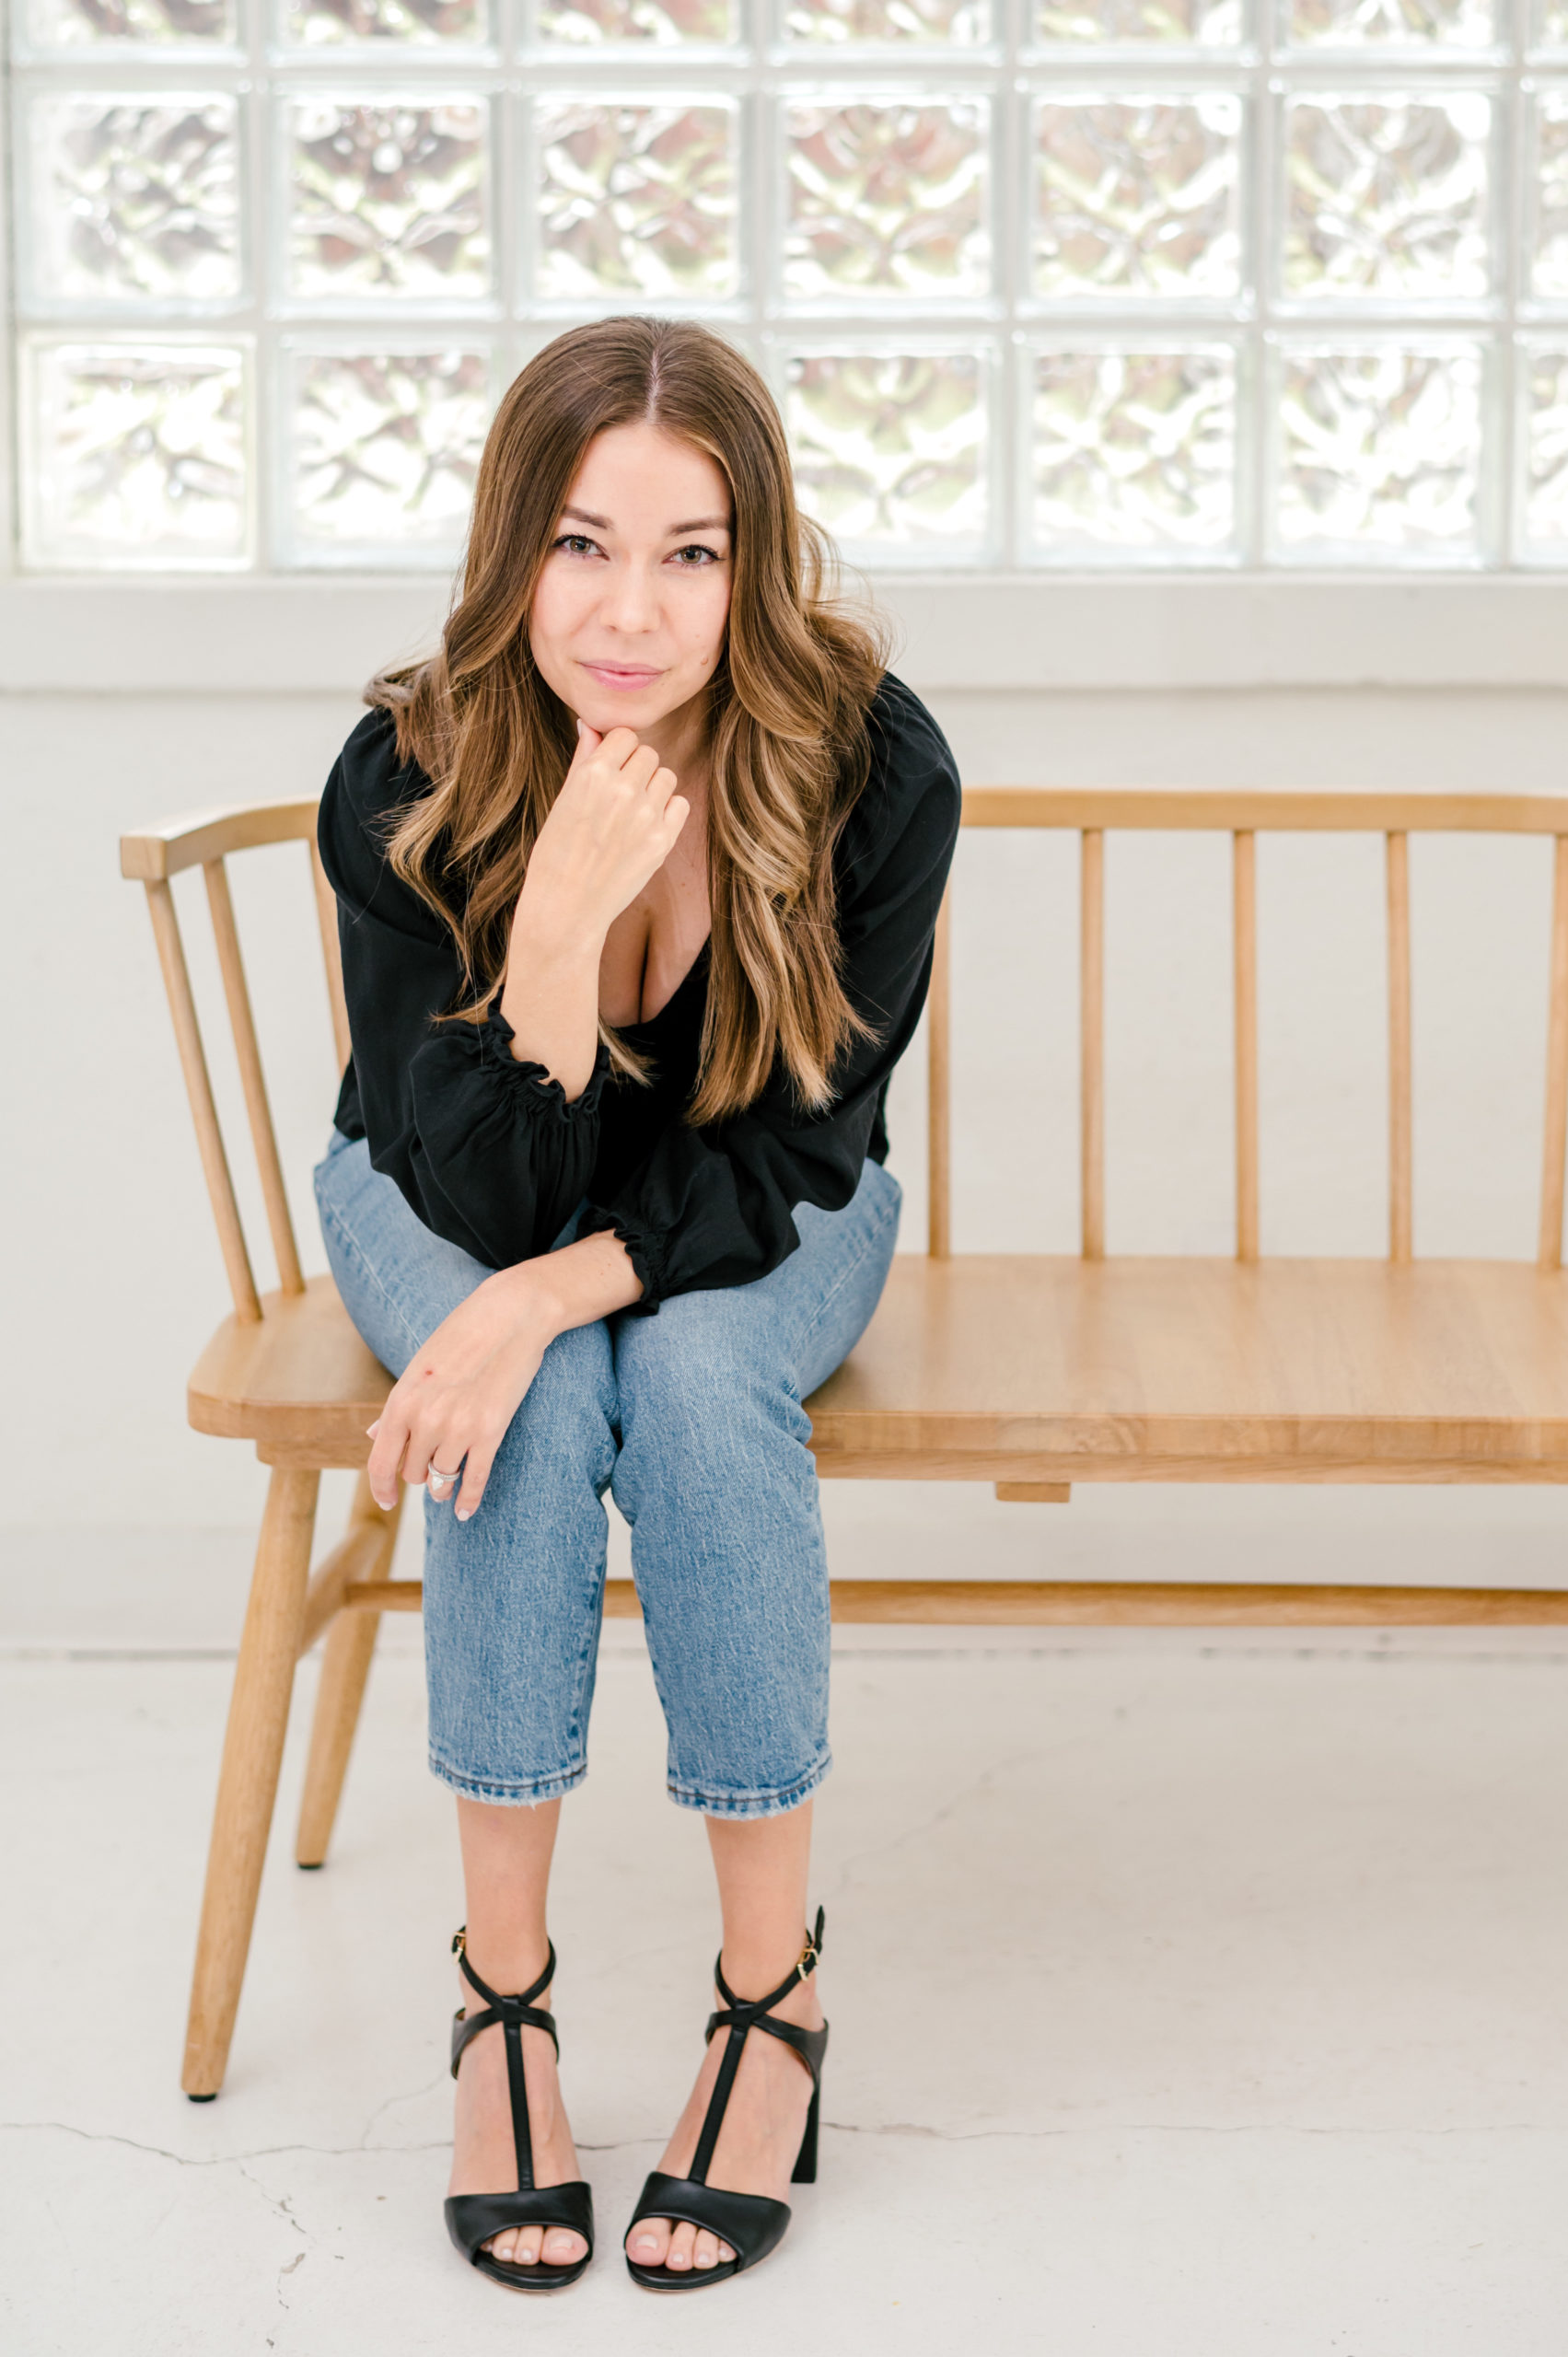 Woman sitting on on wooden bench leaning on her knees smiling in a black blouse and jeans 